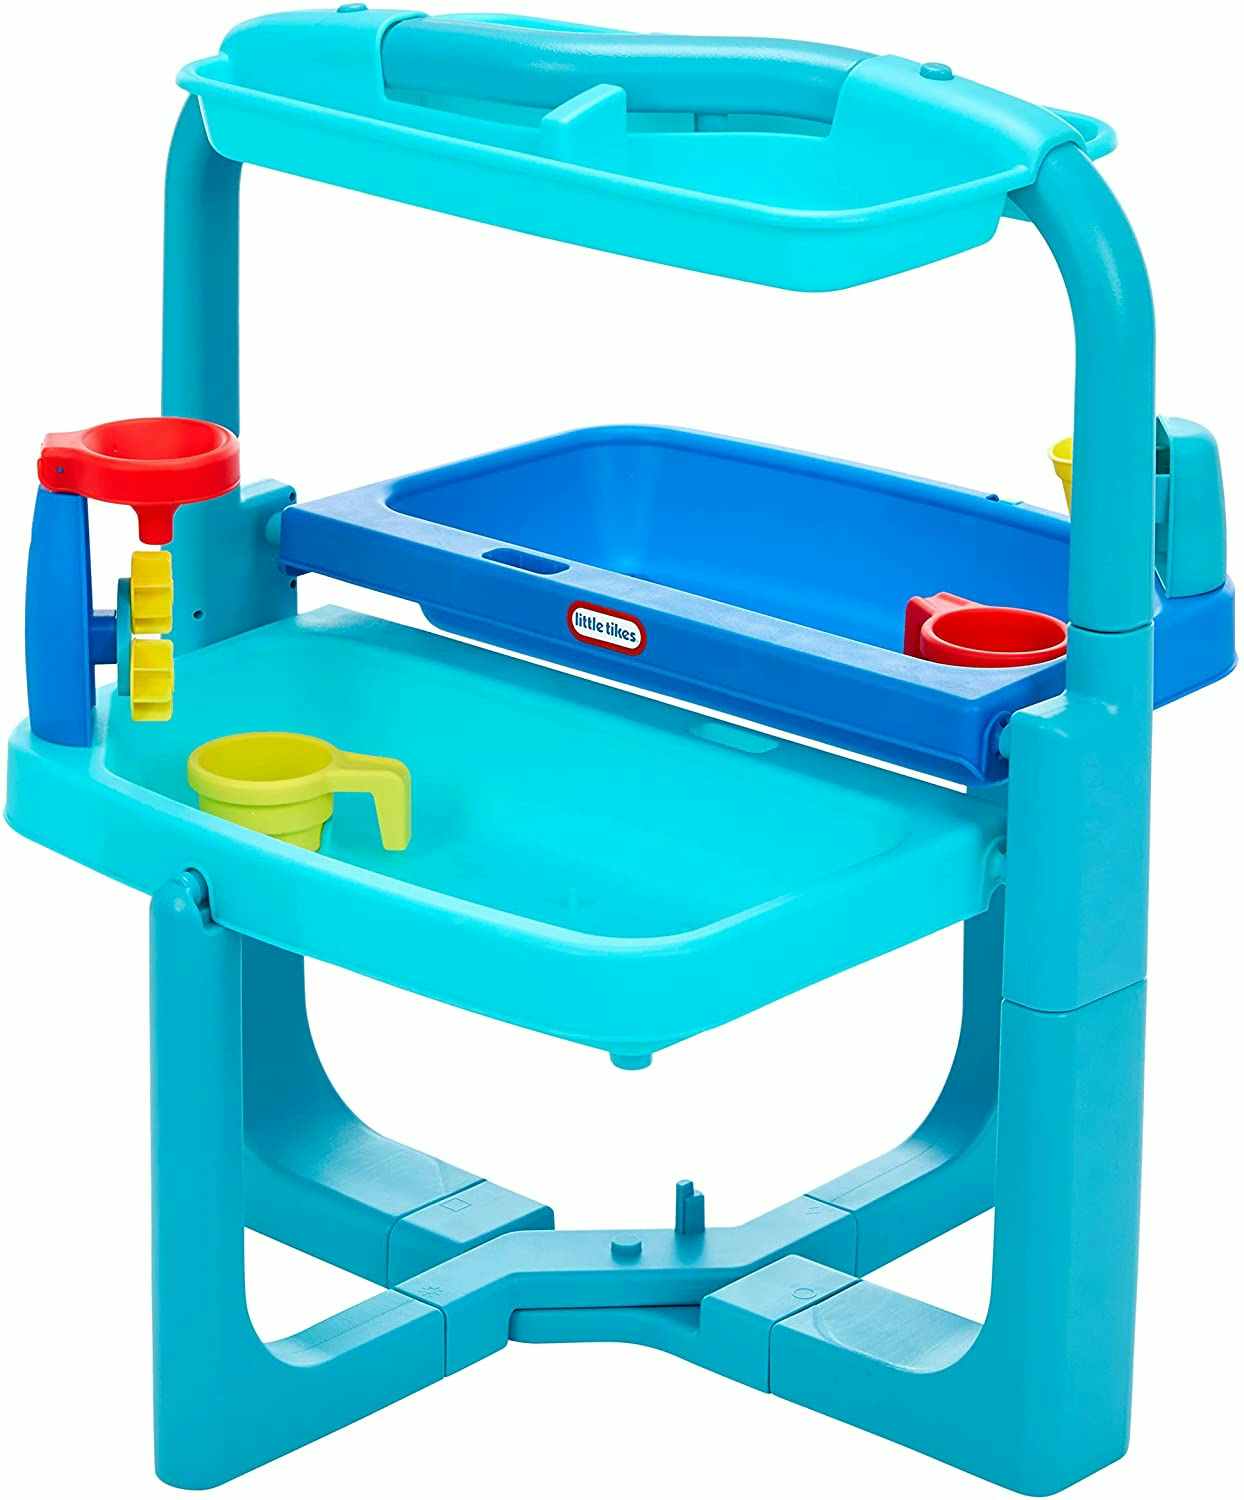 A Little Tikes Outdoor Folding Water Play Table on a white background.